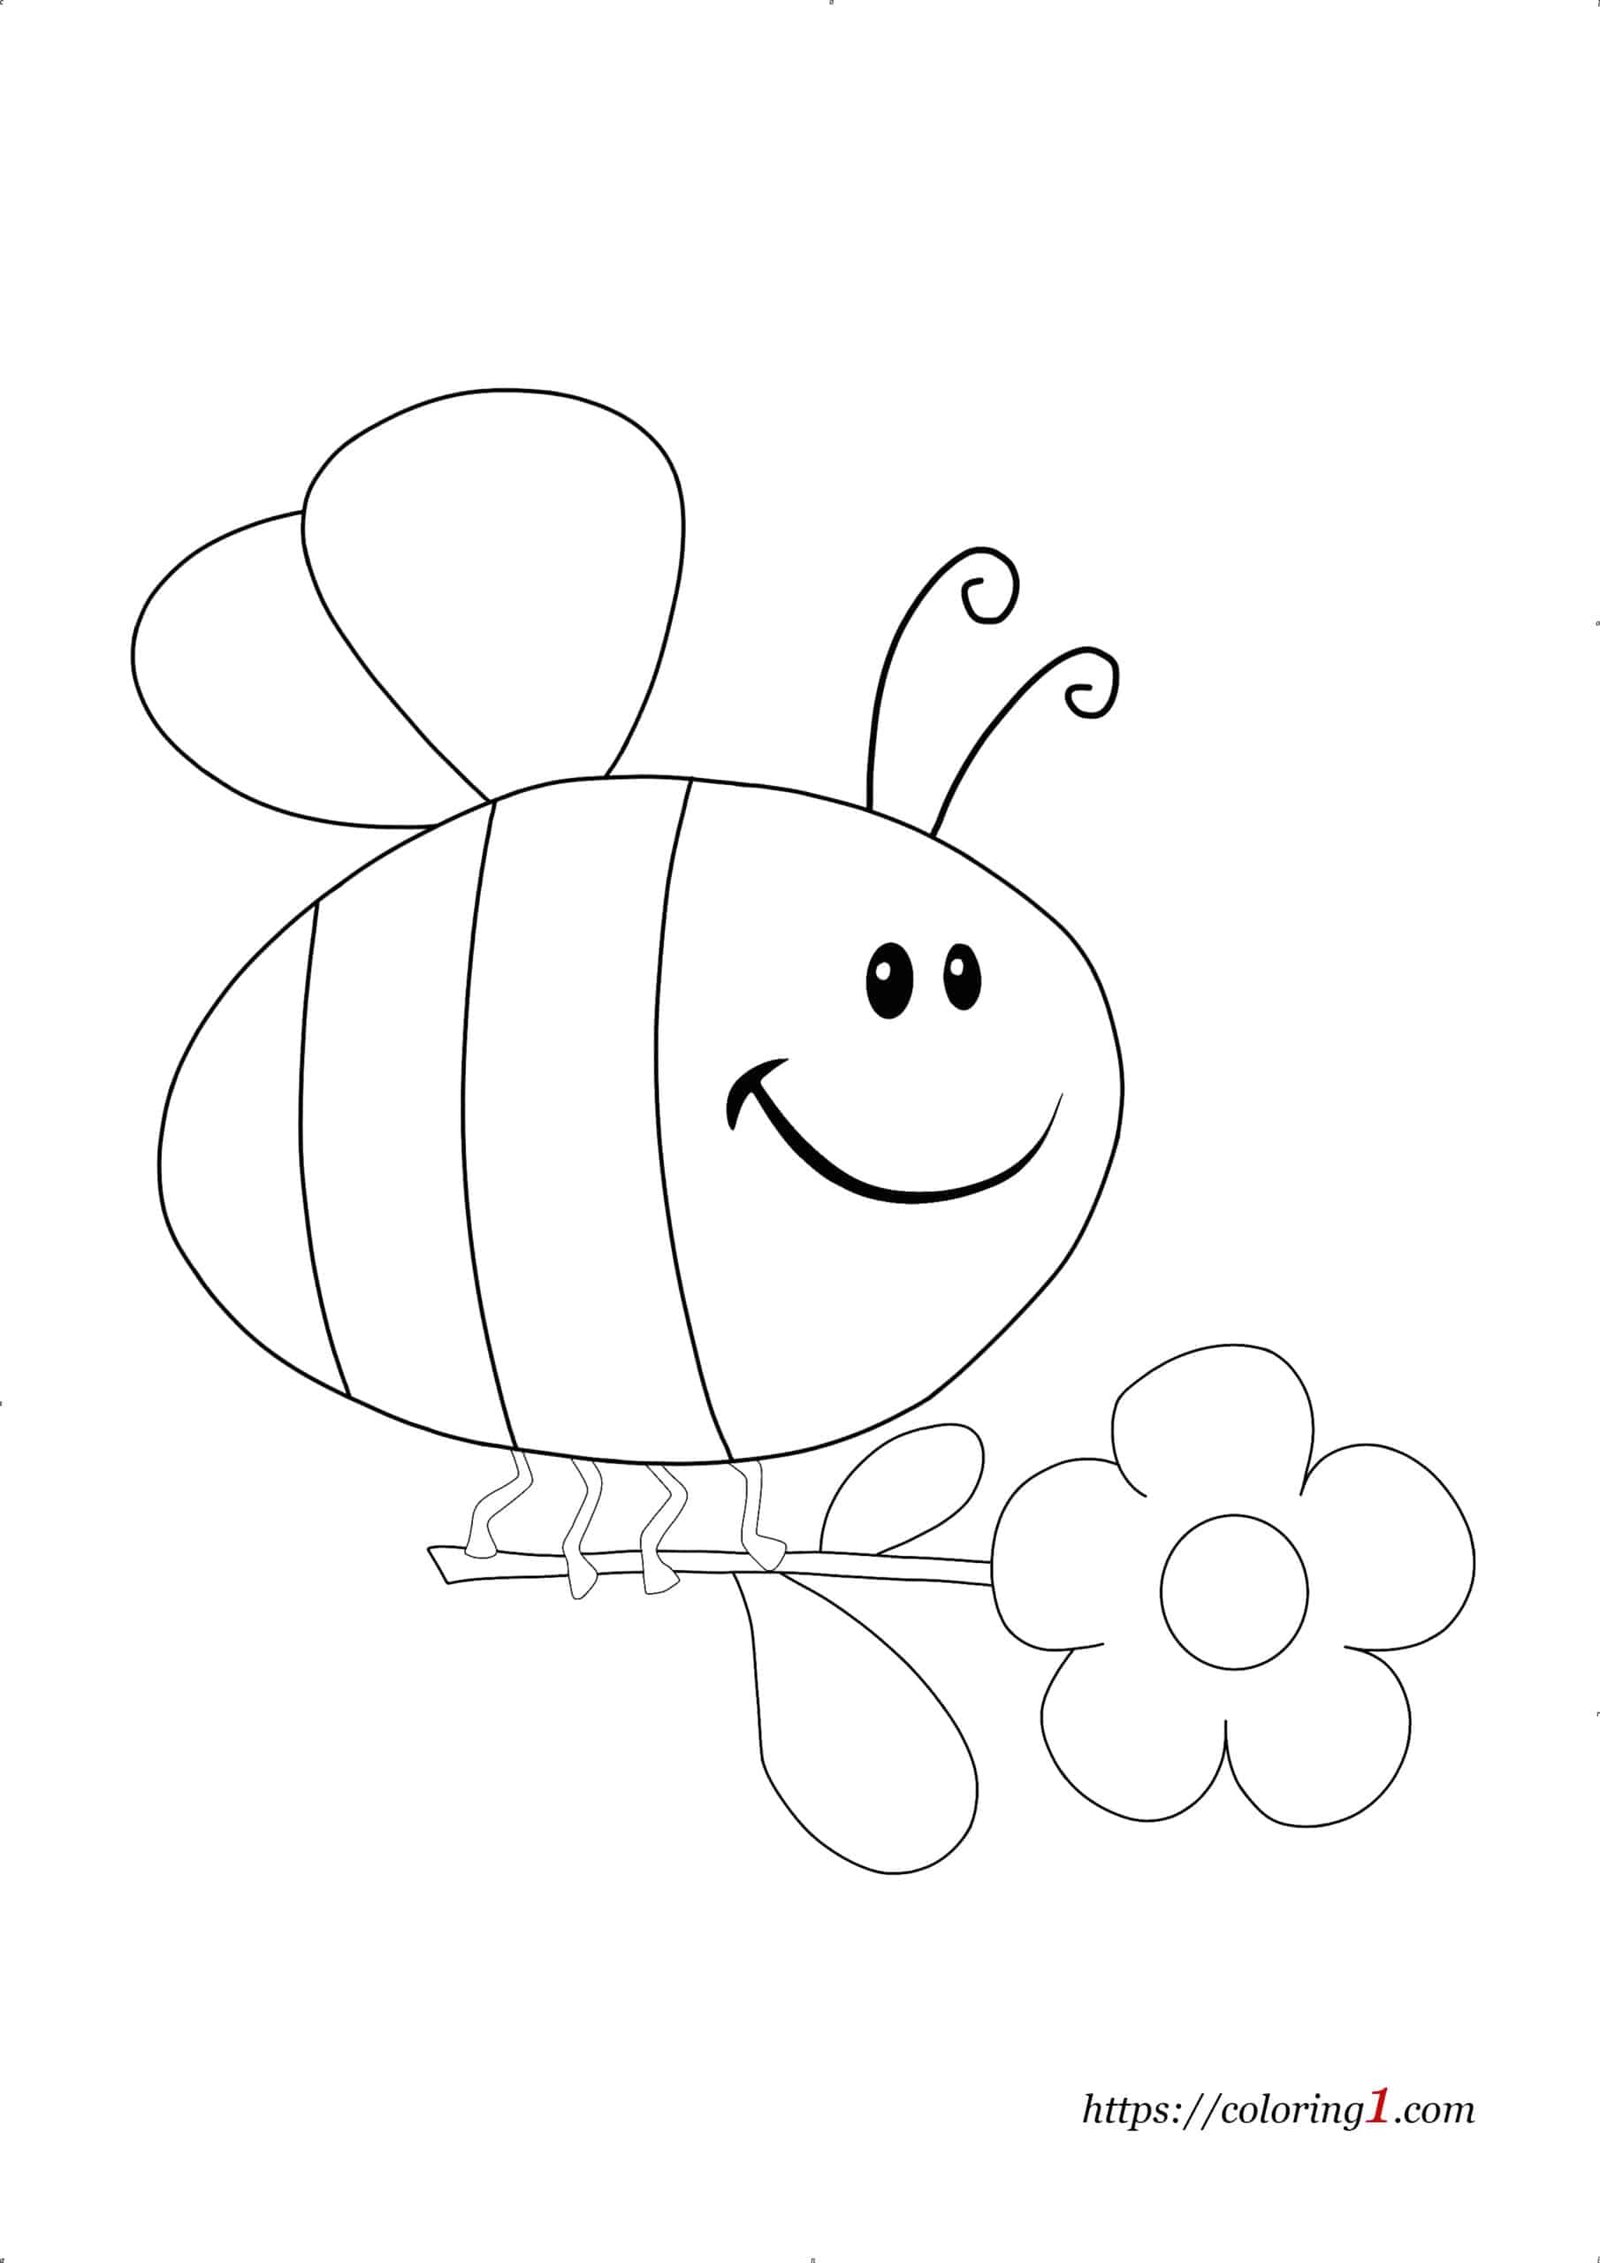 Flower and Bee coloring page